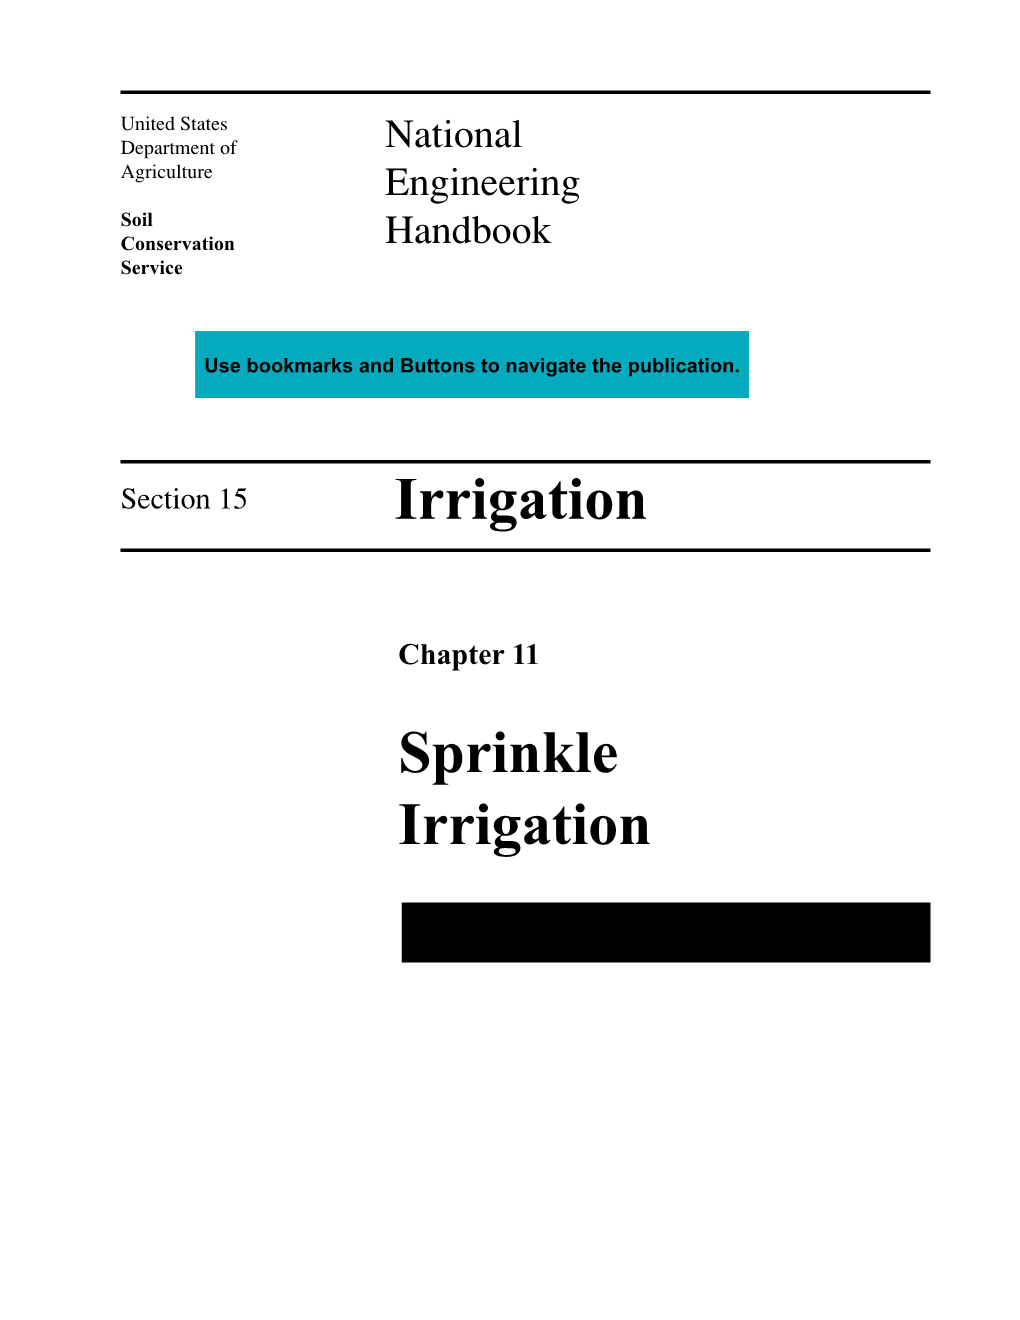 Sprinkle Irrigation Contents